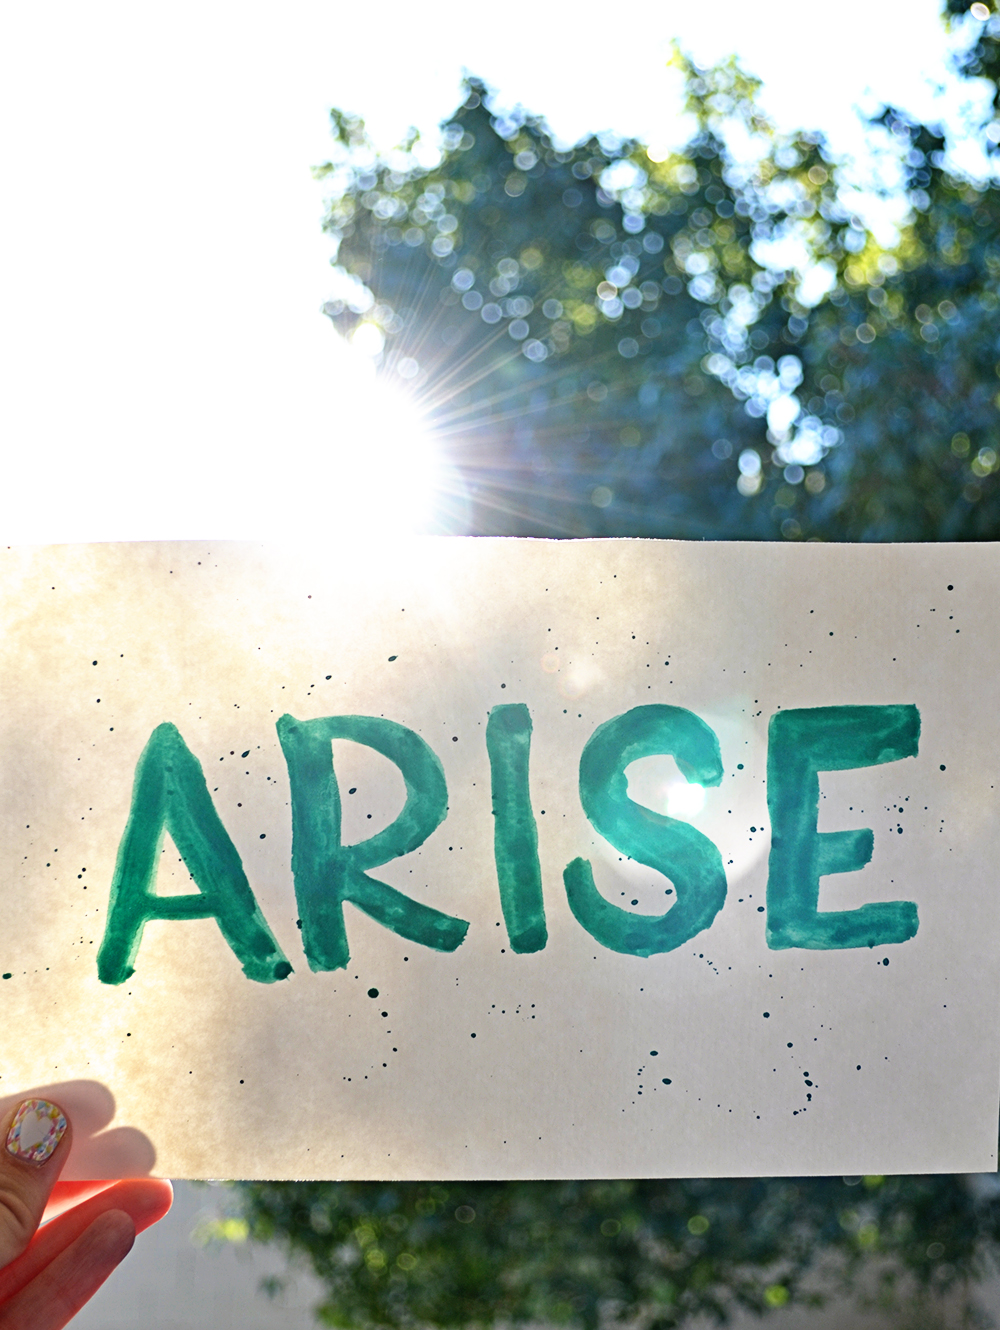 My Mantra For March: ARISE